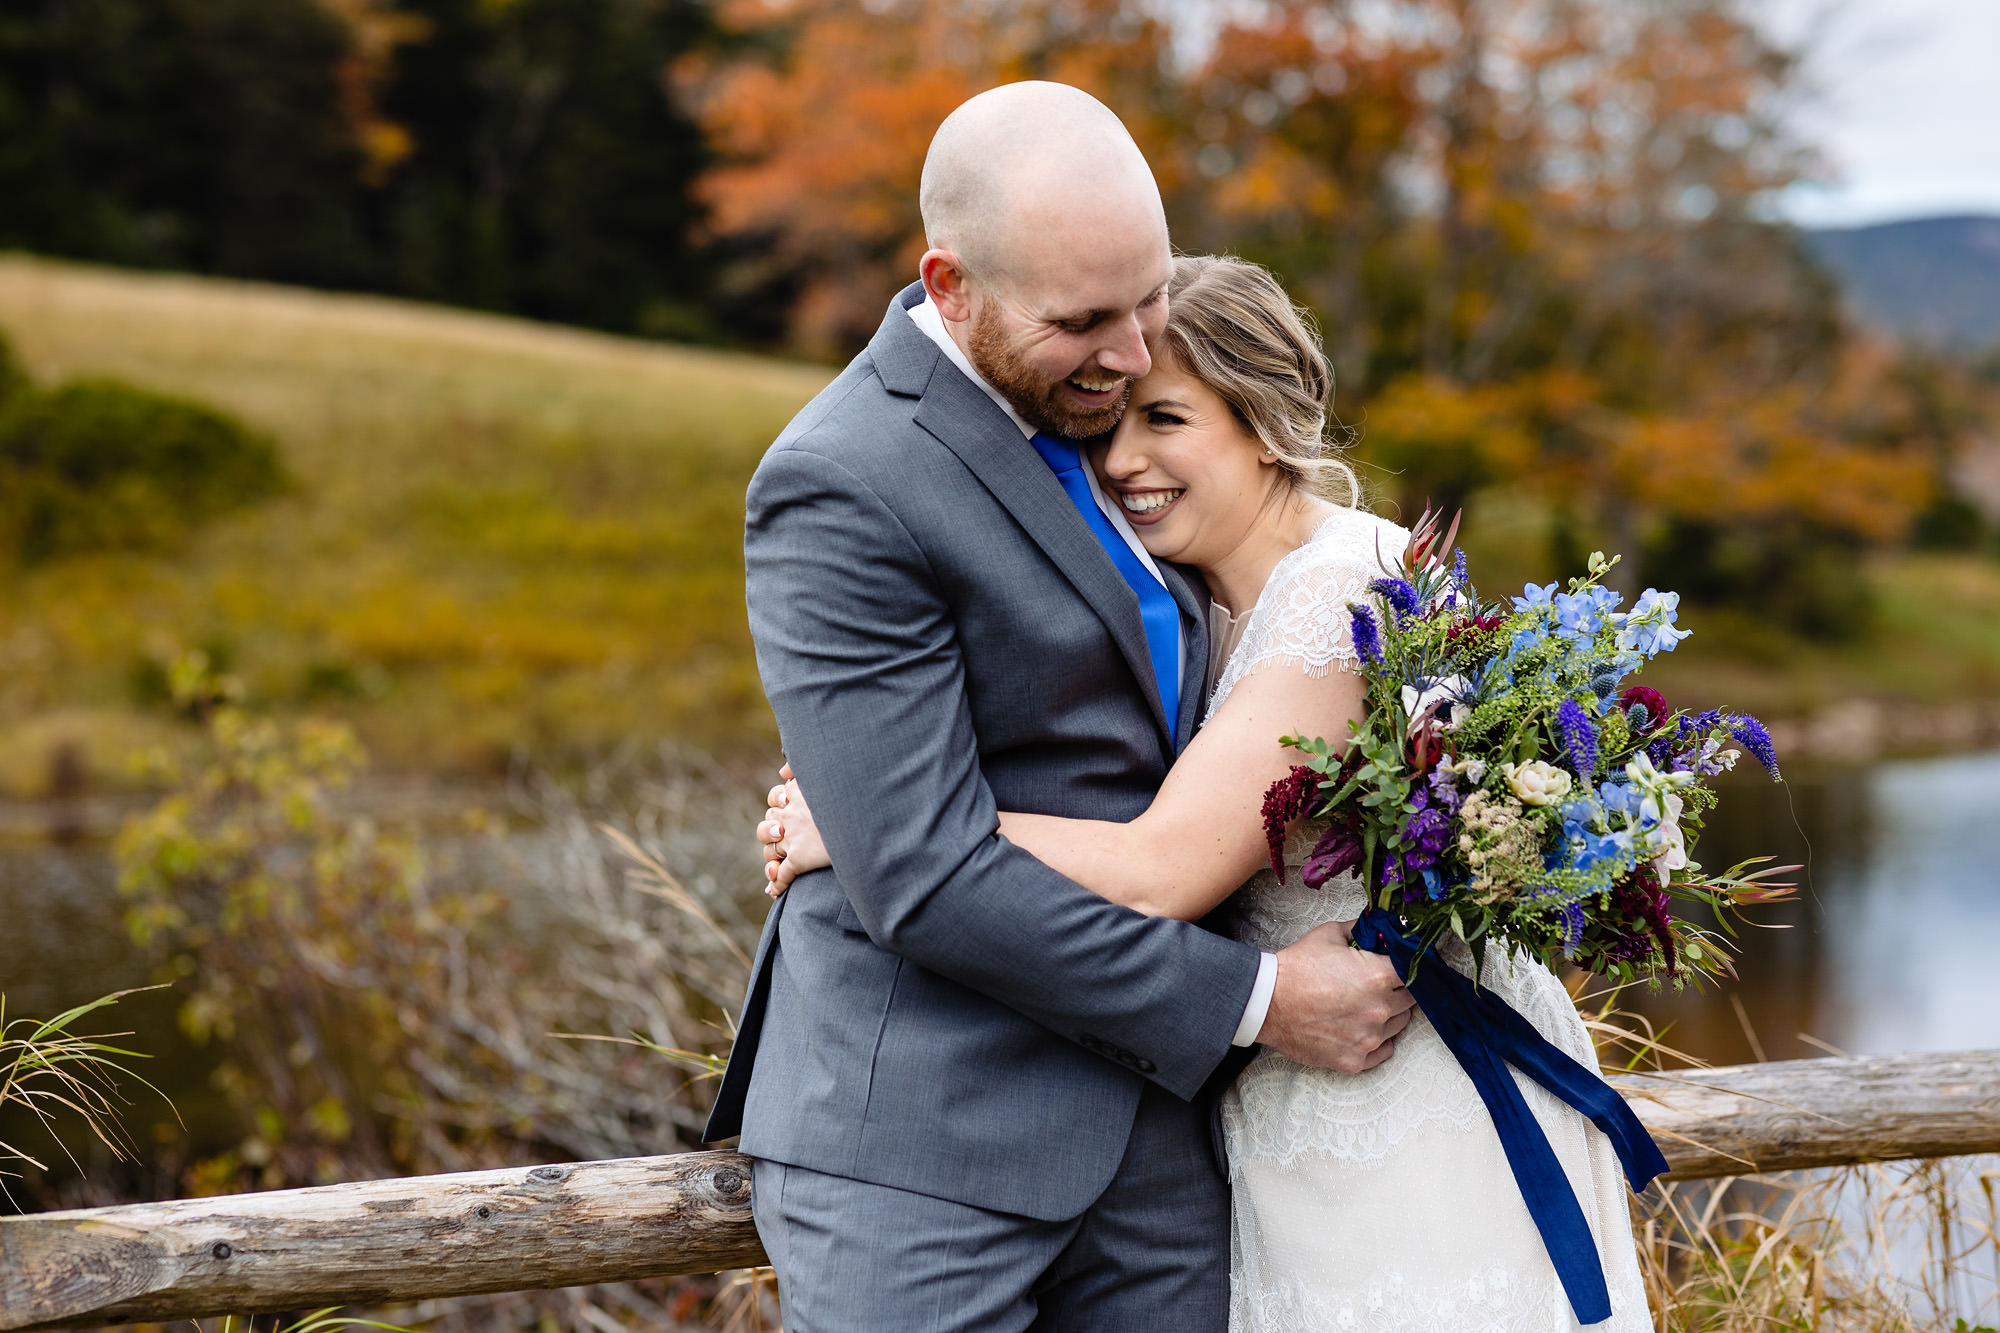 Jenna and Jordan hug during their Acadia elopement in the fall